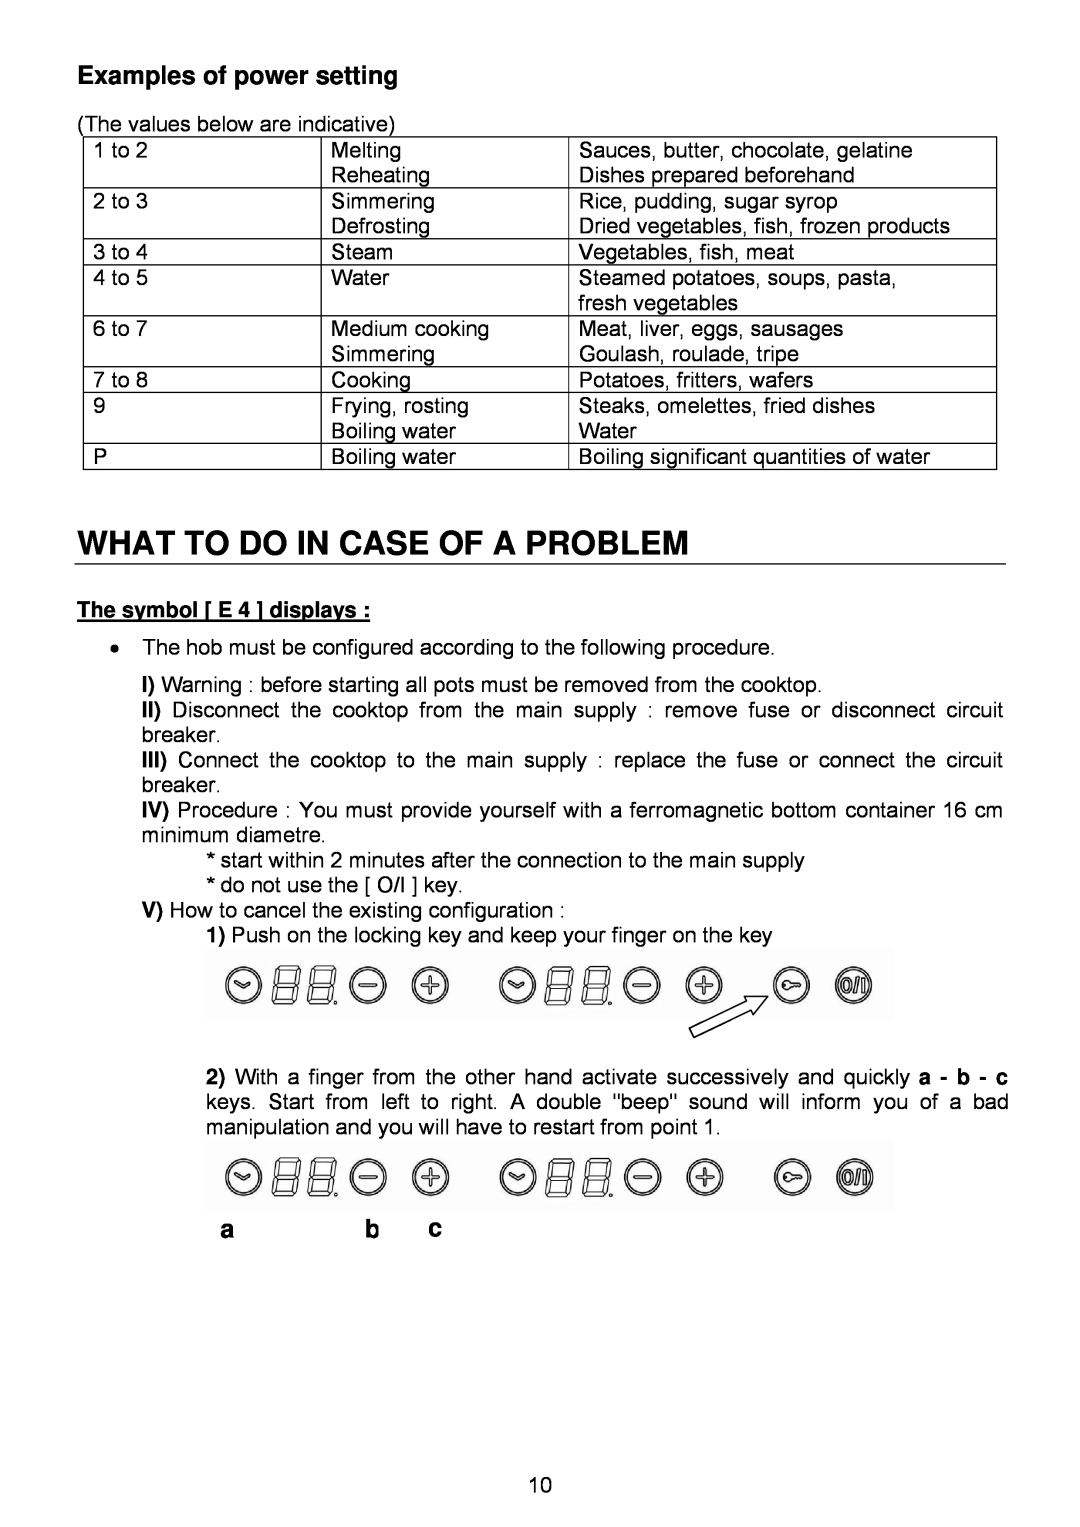 321 Studios 7322 230 user manual What To Do In Case Of A Problem, Examples of power setting, The symbol E 4 displays 